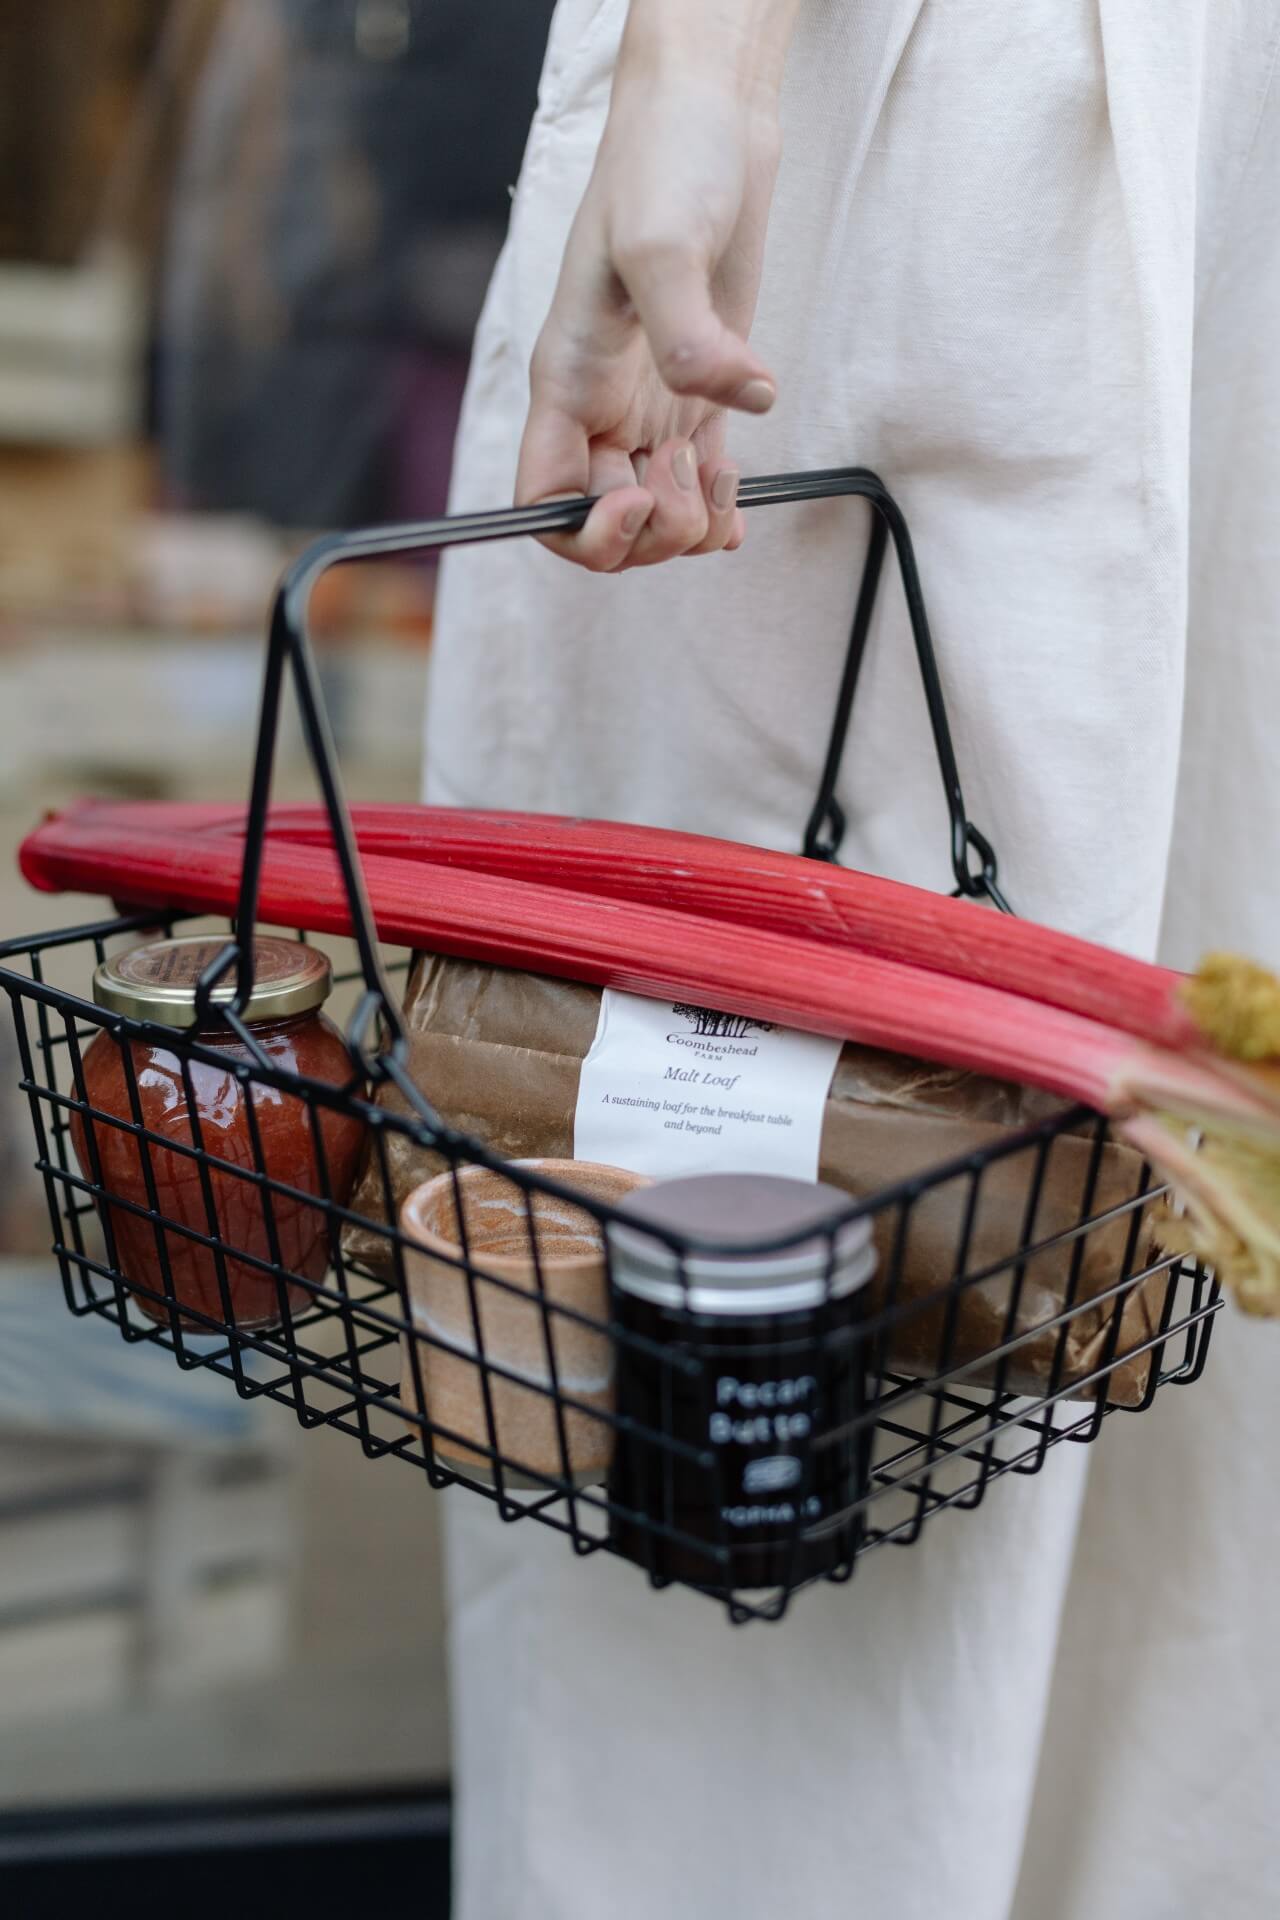 Fresh artisanal bread and rhubarb, sauces and chutneys in black wire basket inside Another Pantry pop up shop